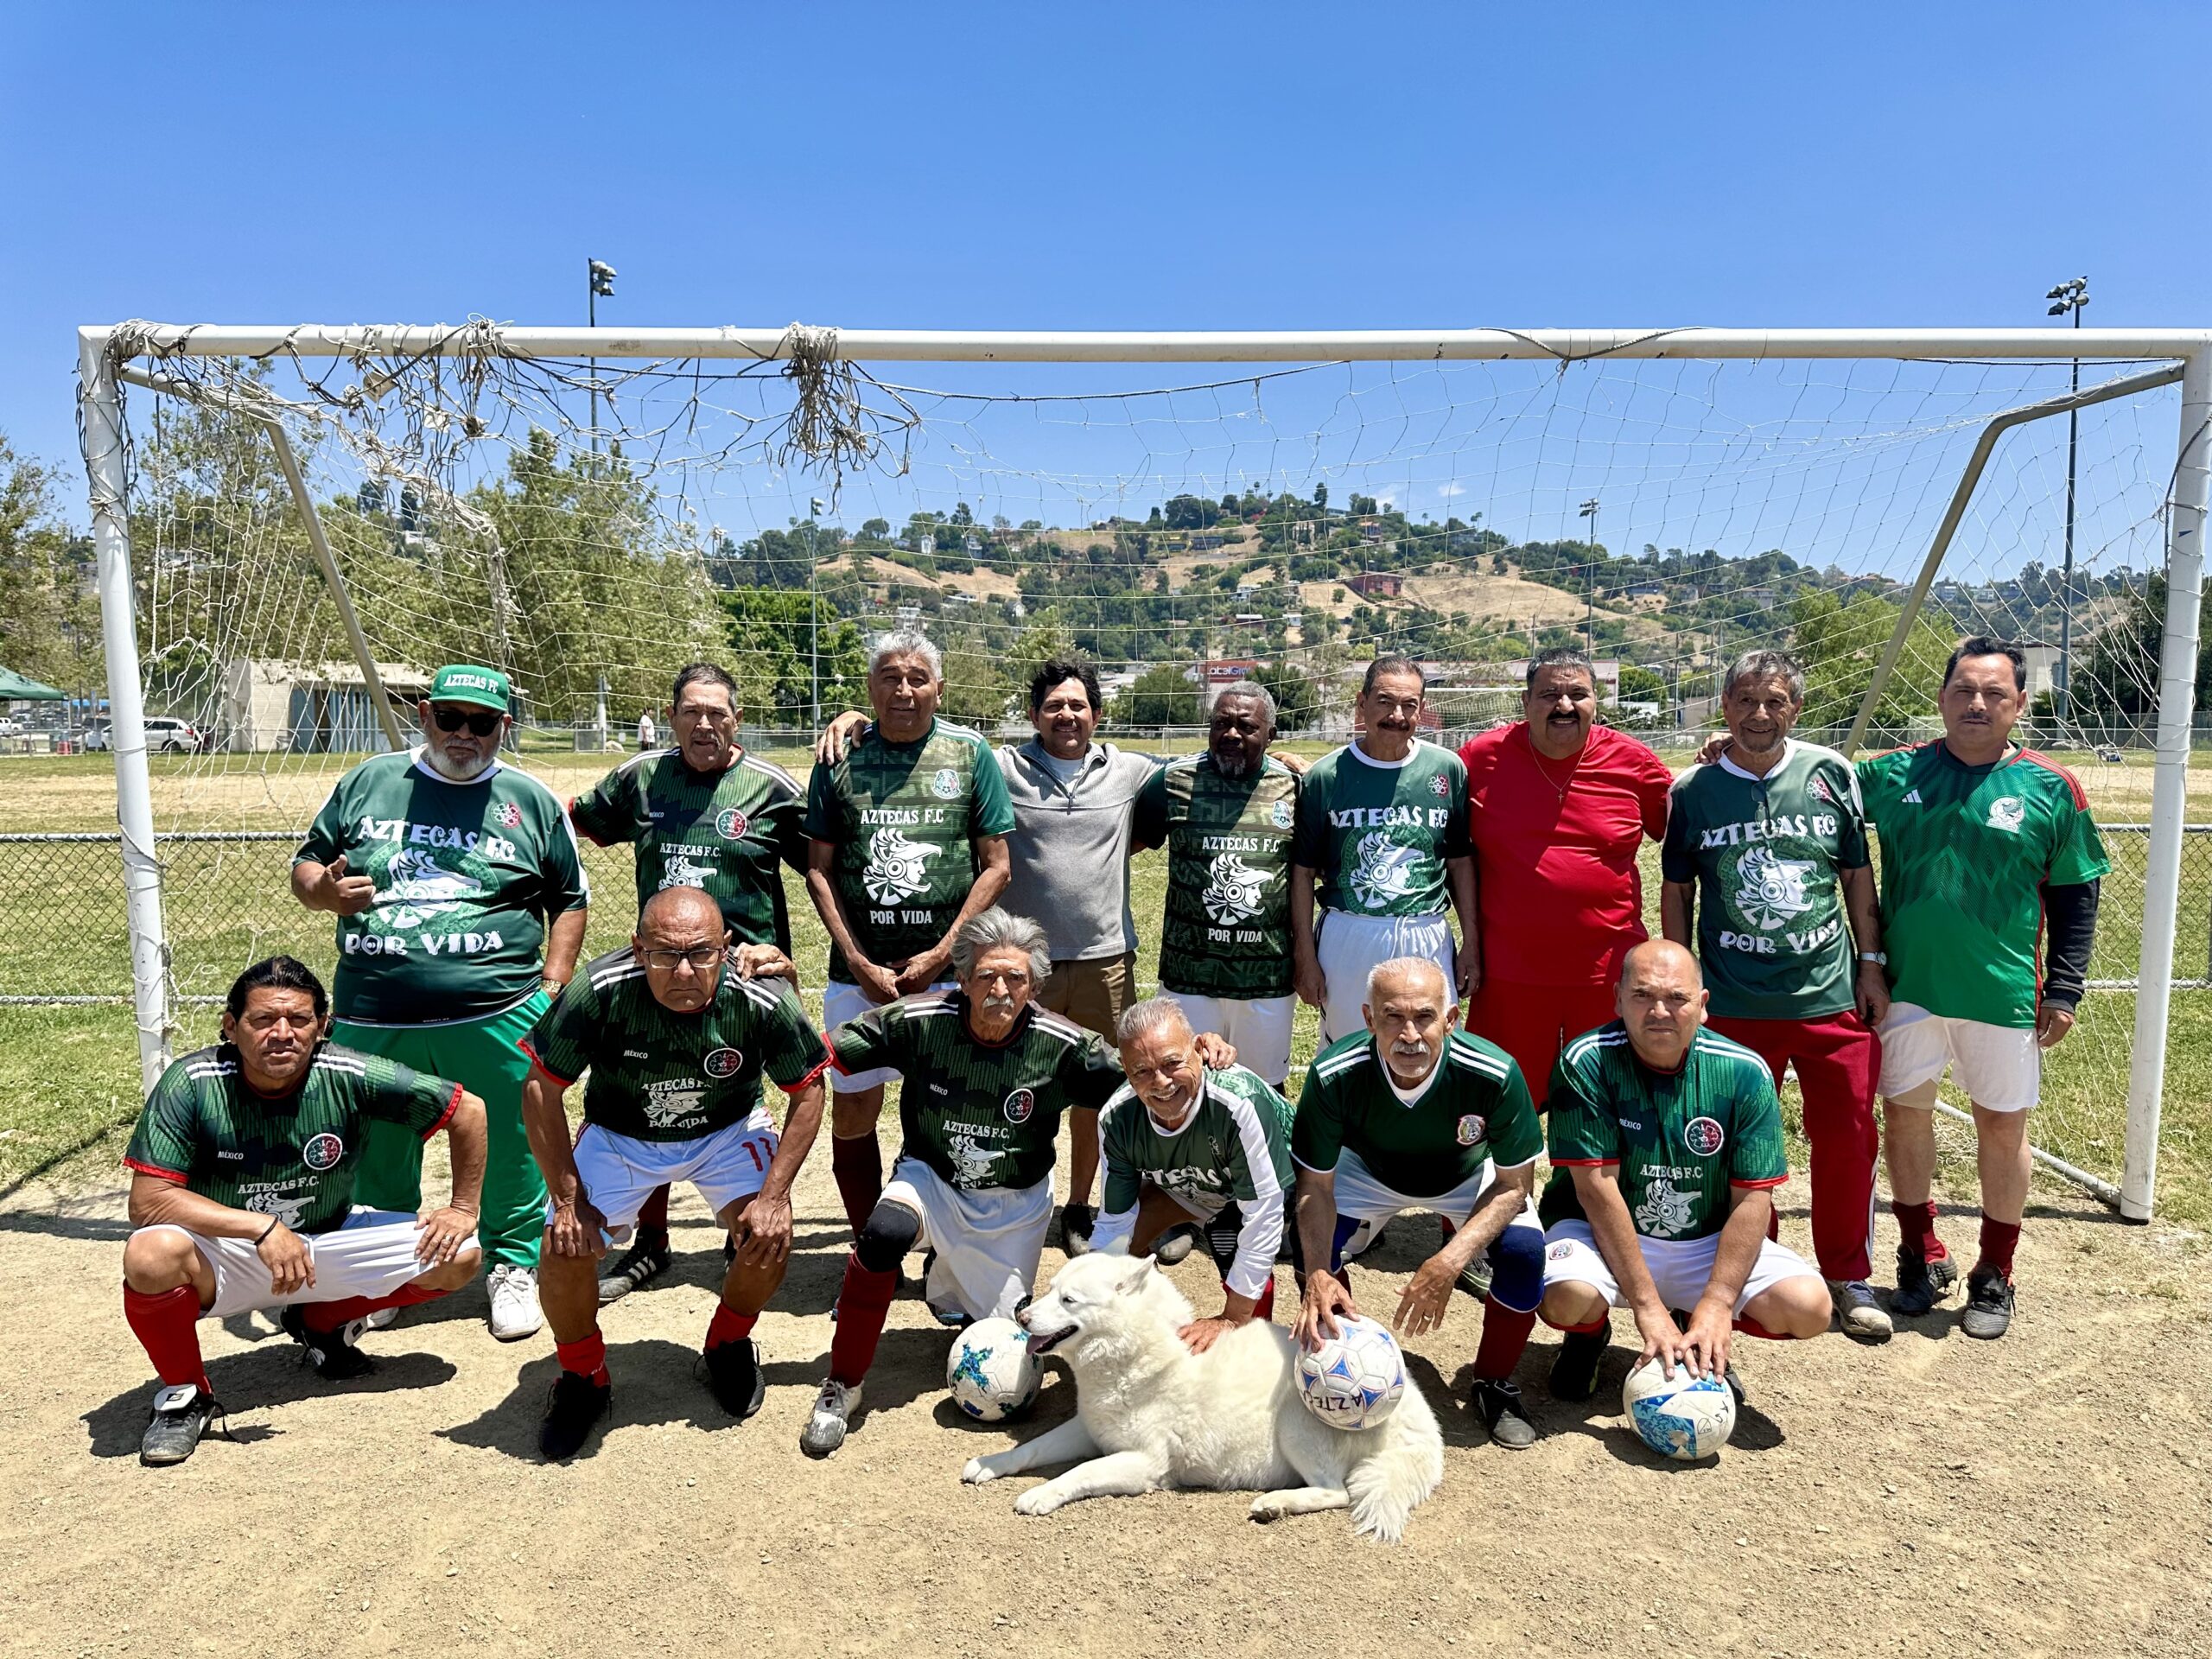 aztecas,-a-soccer-team-in-which-only-older-adults-play